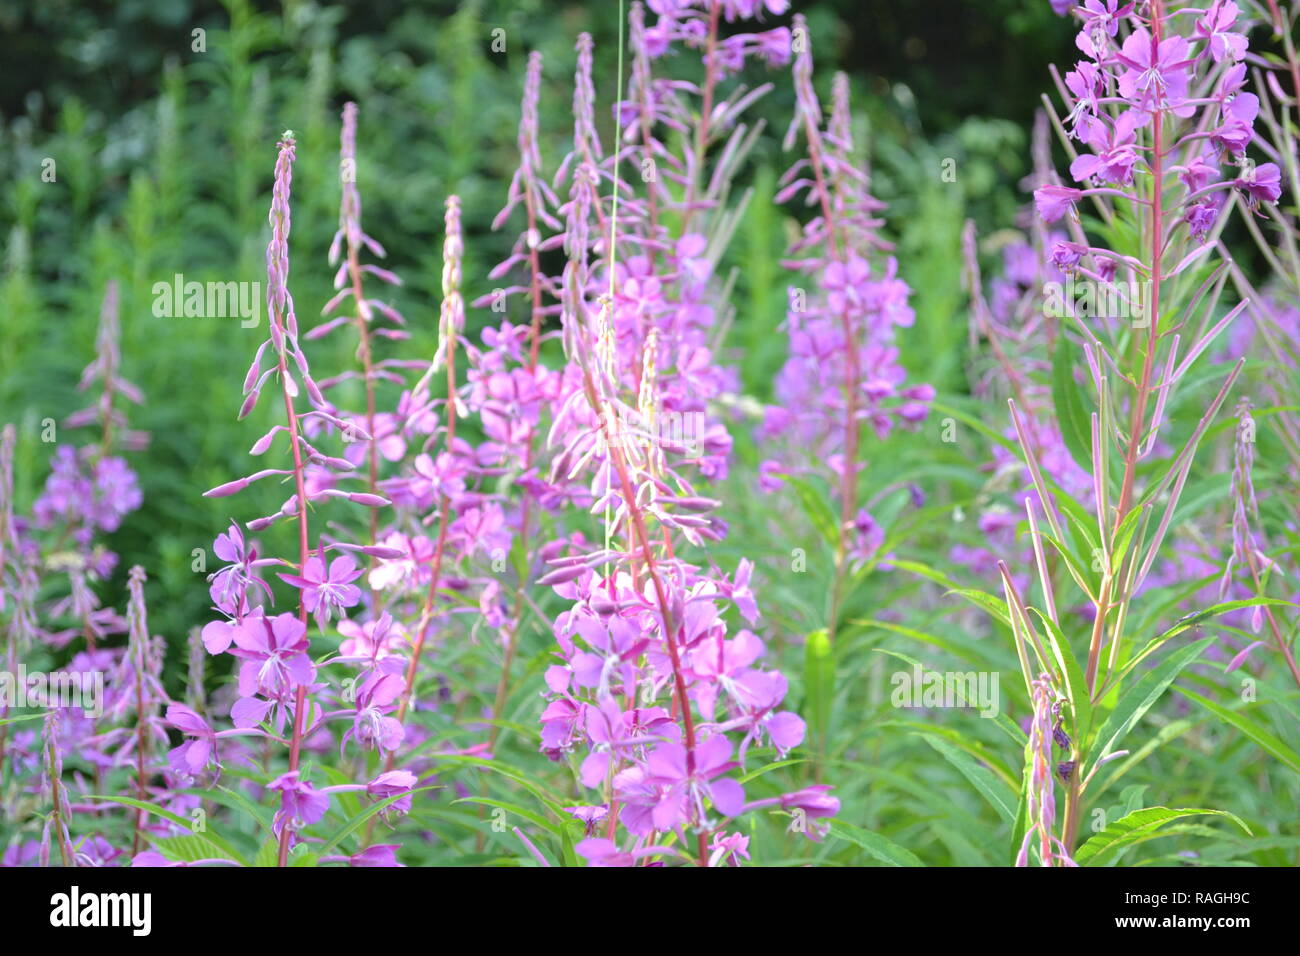 Rosebay willowherb grows in profusion in woodland clearings in the North Downs, here at One Tree Hill, Sevenoaks, Kent, on the Greensand Ridge. July Stock Photo